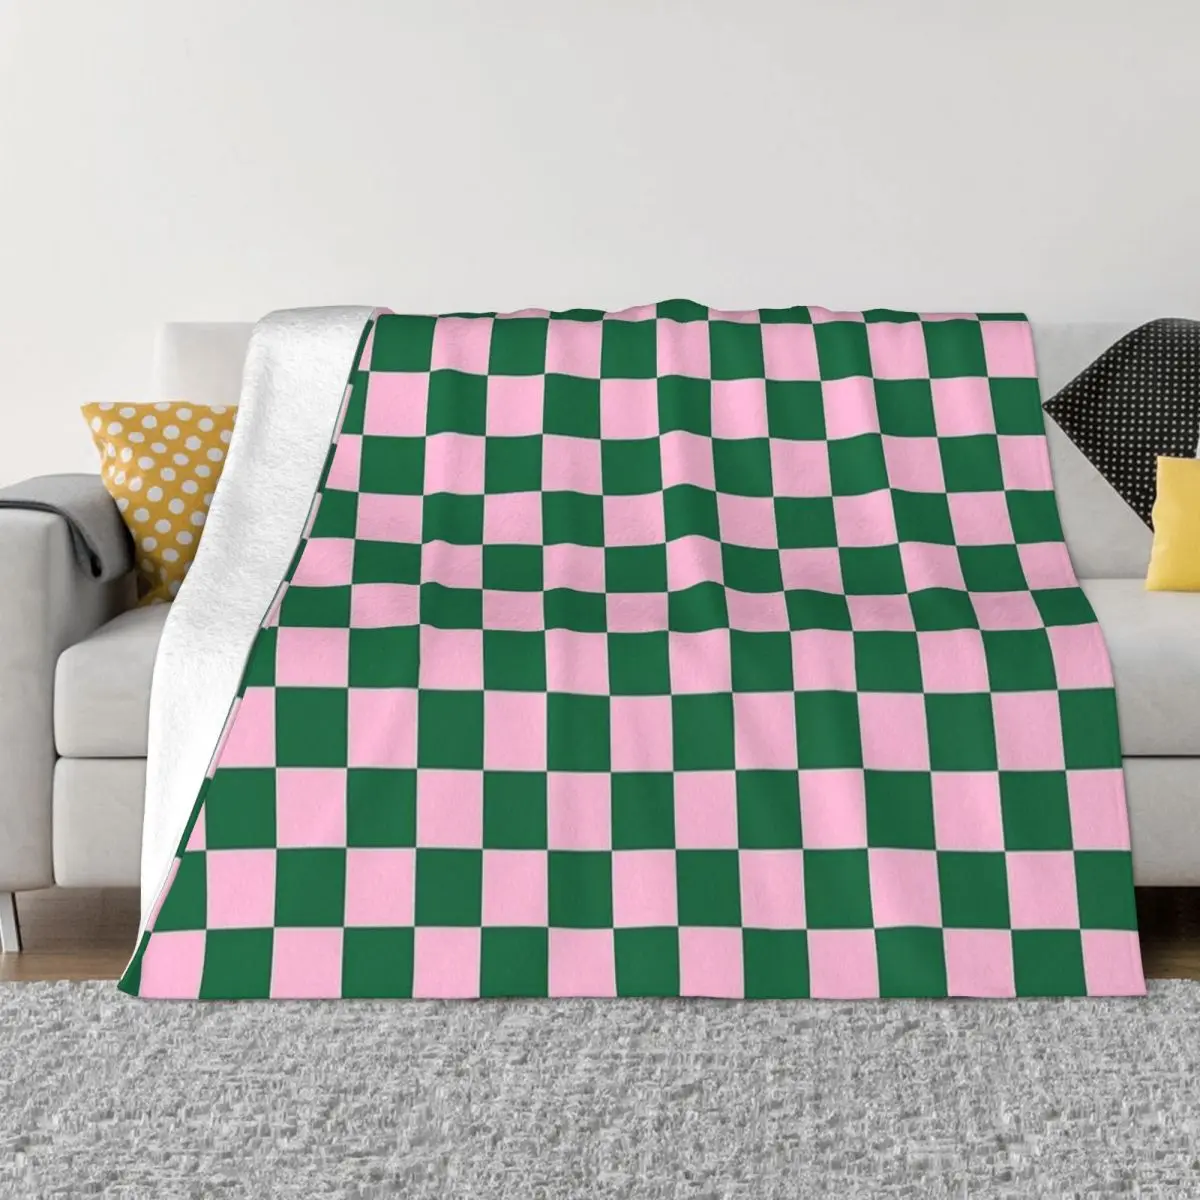 

Candy Pink And Cadmium Green Checkerboard Blankets Flannel Geometric Checkered Warm Throw Blanket for Home Bedroom Bedding Throw